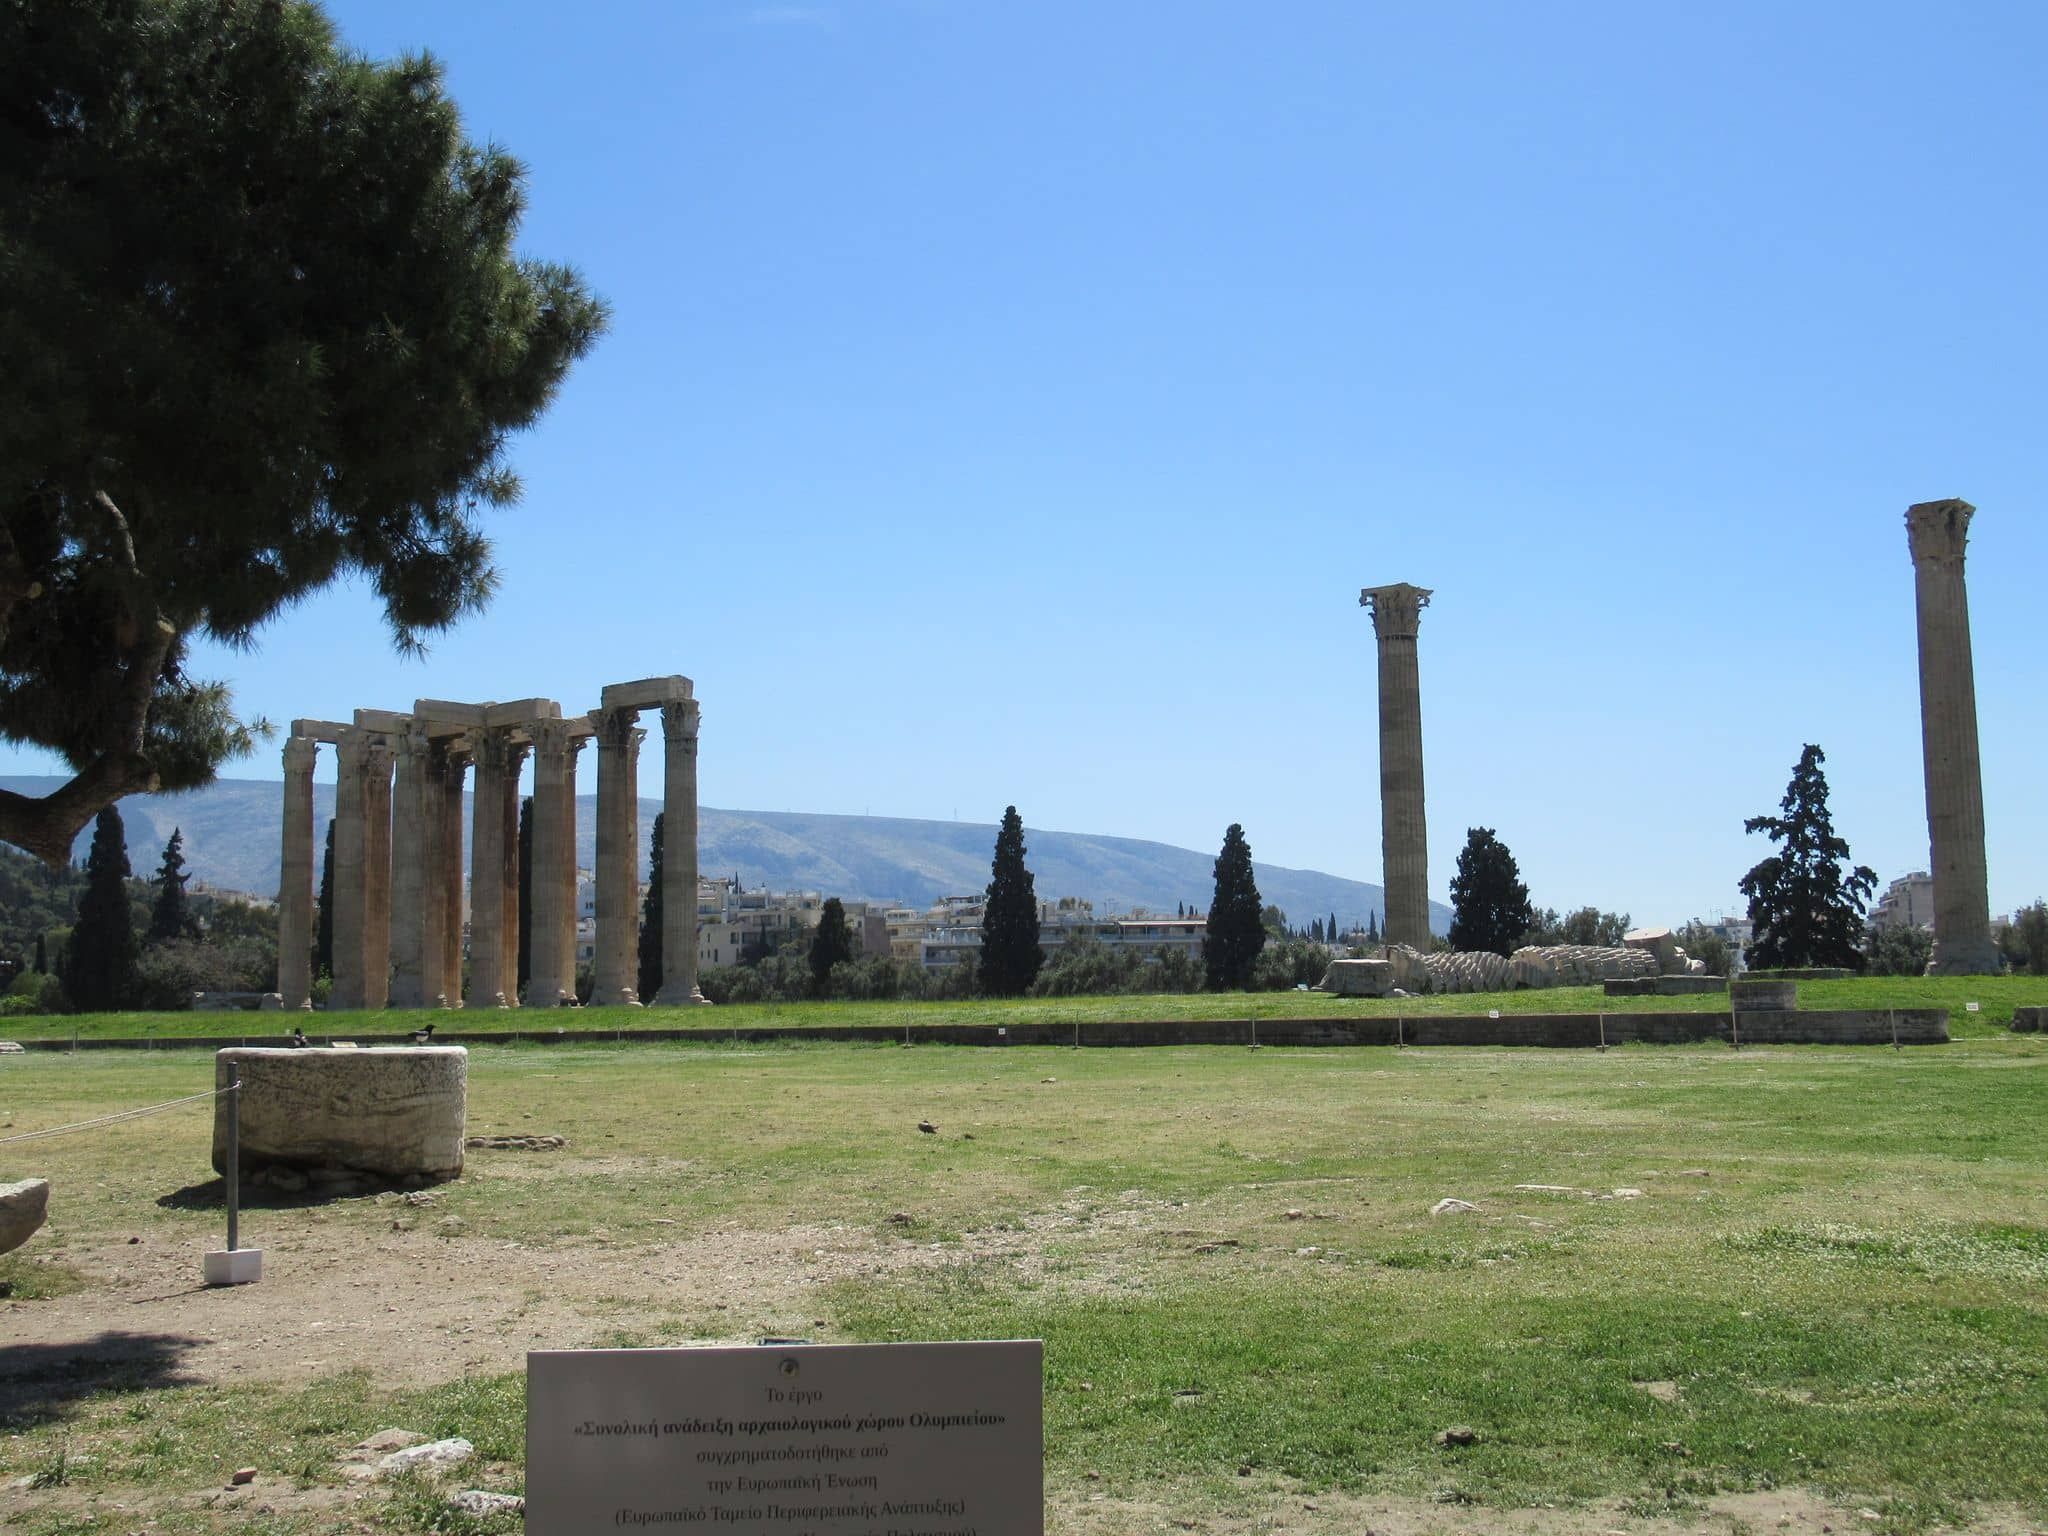 Temple of Olympian Zeus or Olympieion in Athens